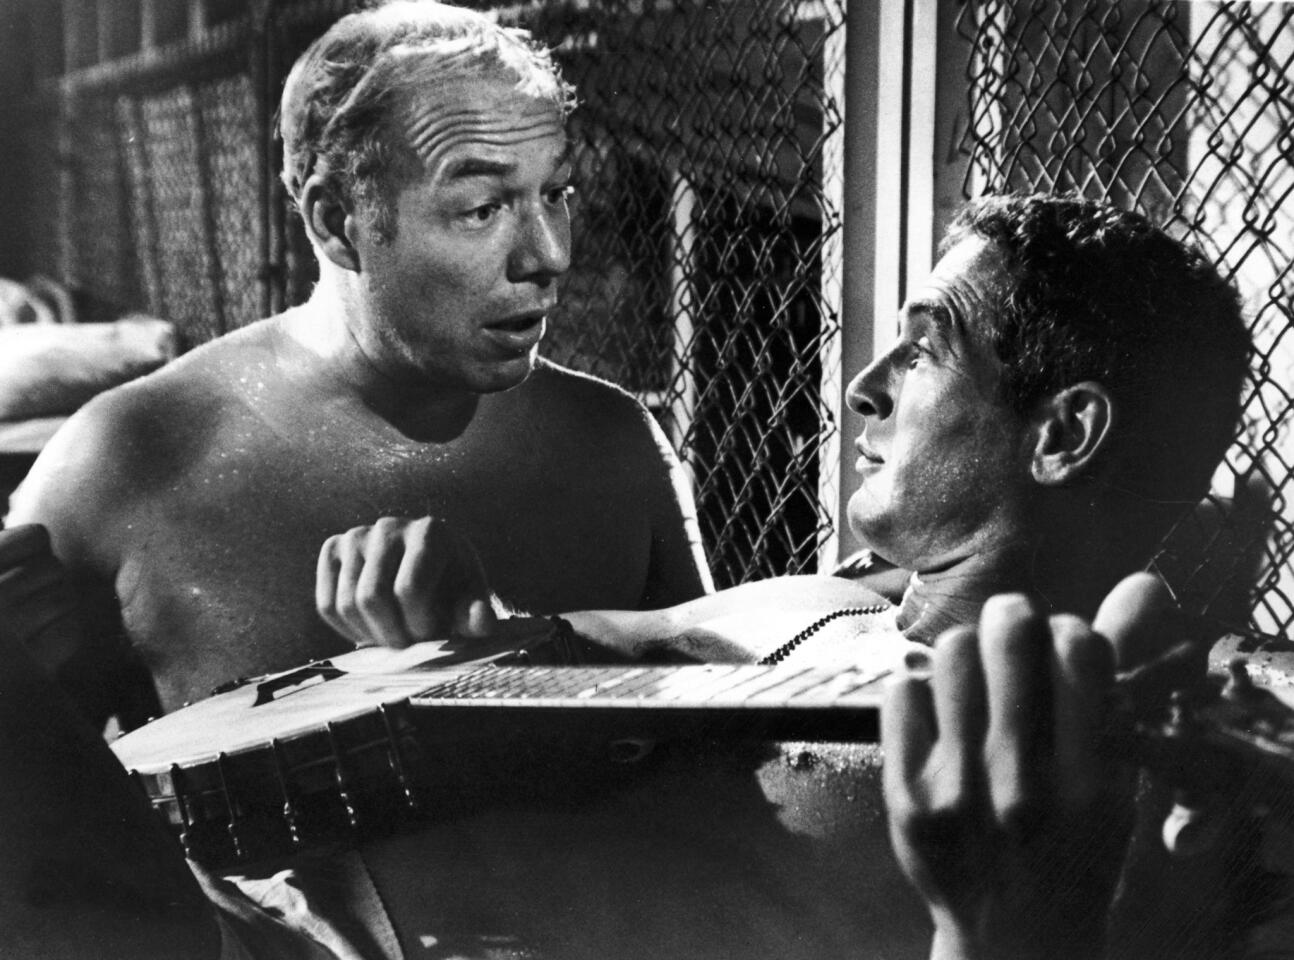 Paul Newman, playing a banjo, and George Kennedy in the film "Cool Hand Luke" directed by Stuart Rosenberg. Newman won a best actor Oscar, and Kennedy won a best supporting actor Oscar for their roles in the film.